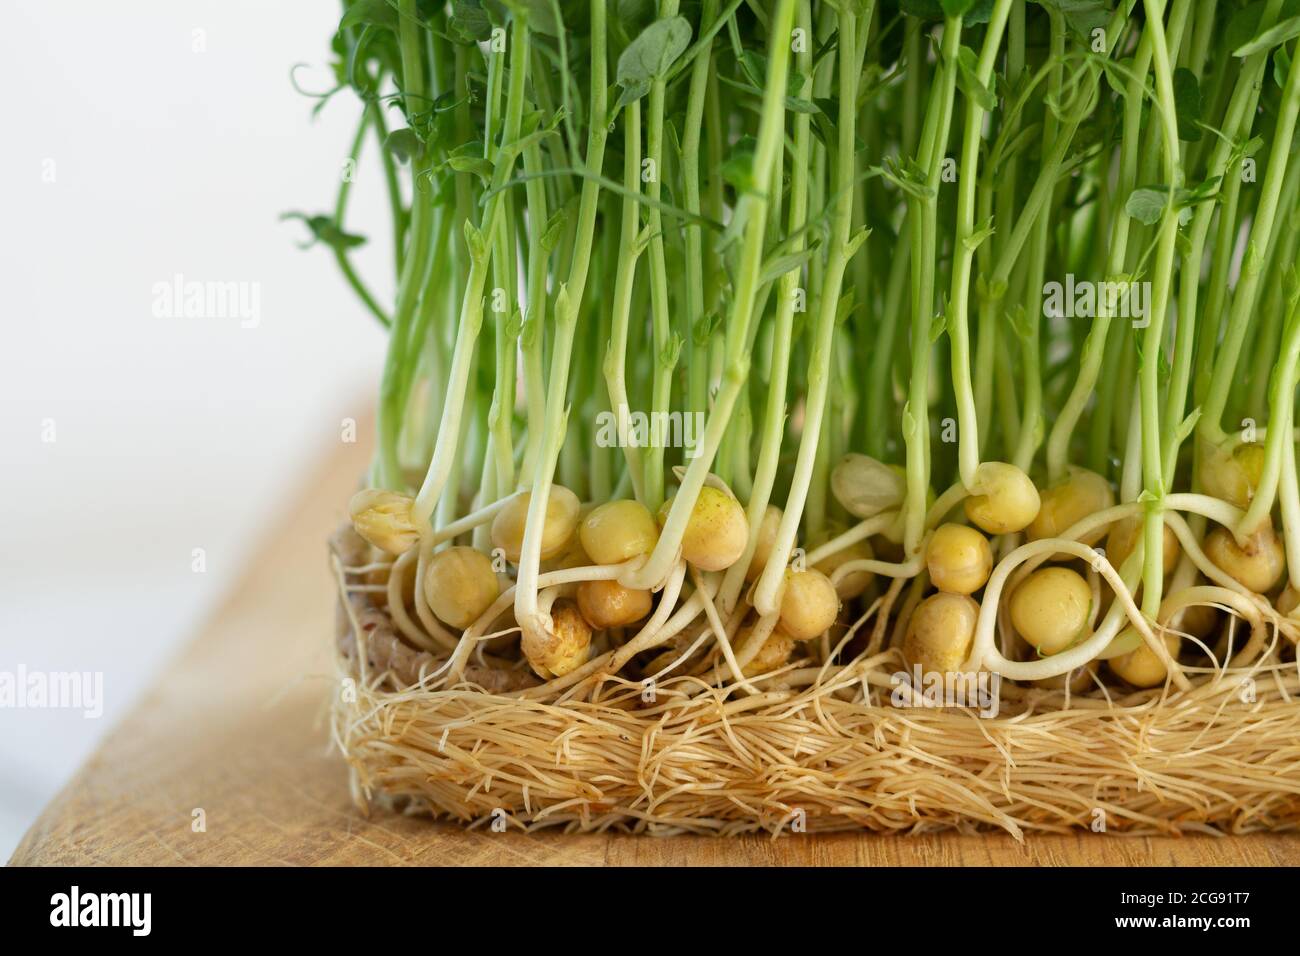 Young pea sprouts, growing microgreen close-up Stock Photo